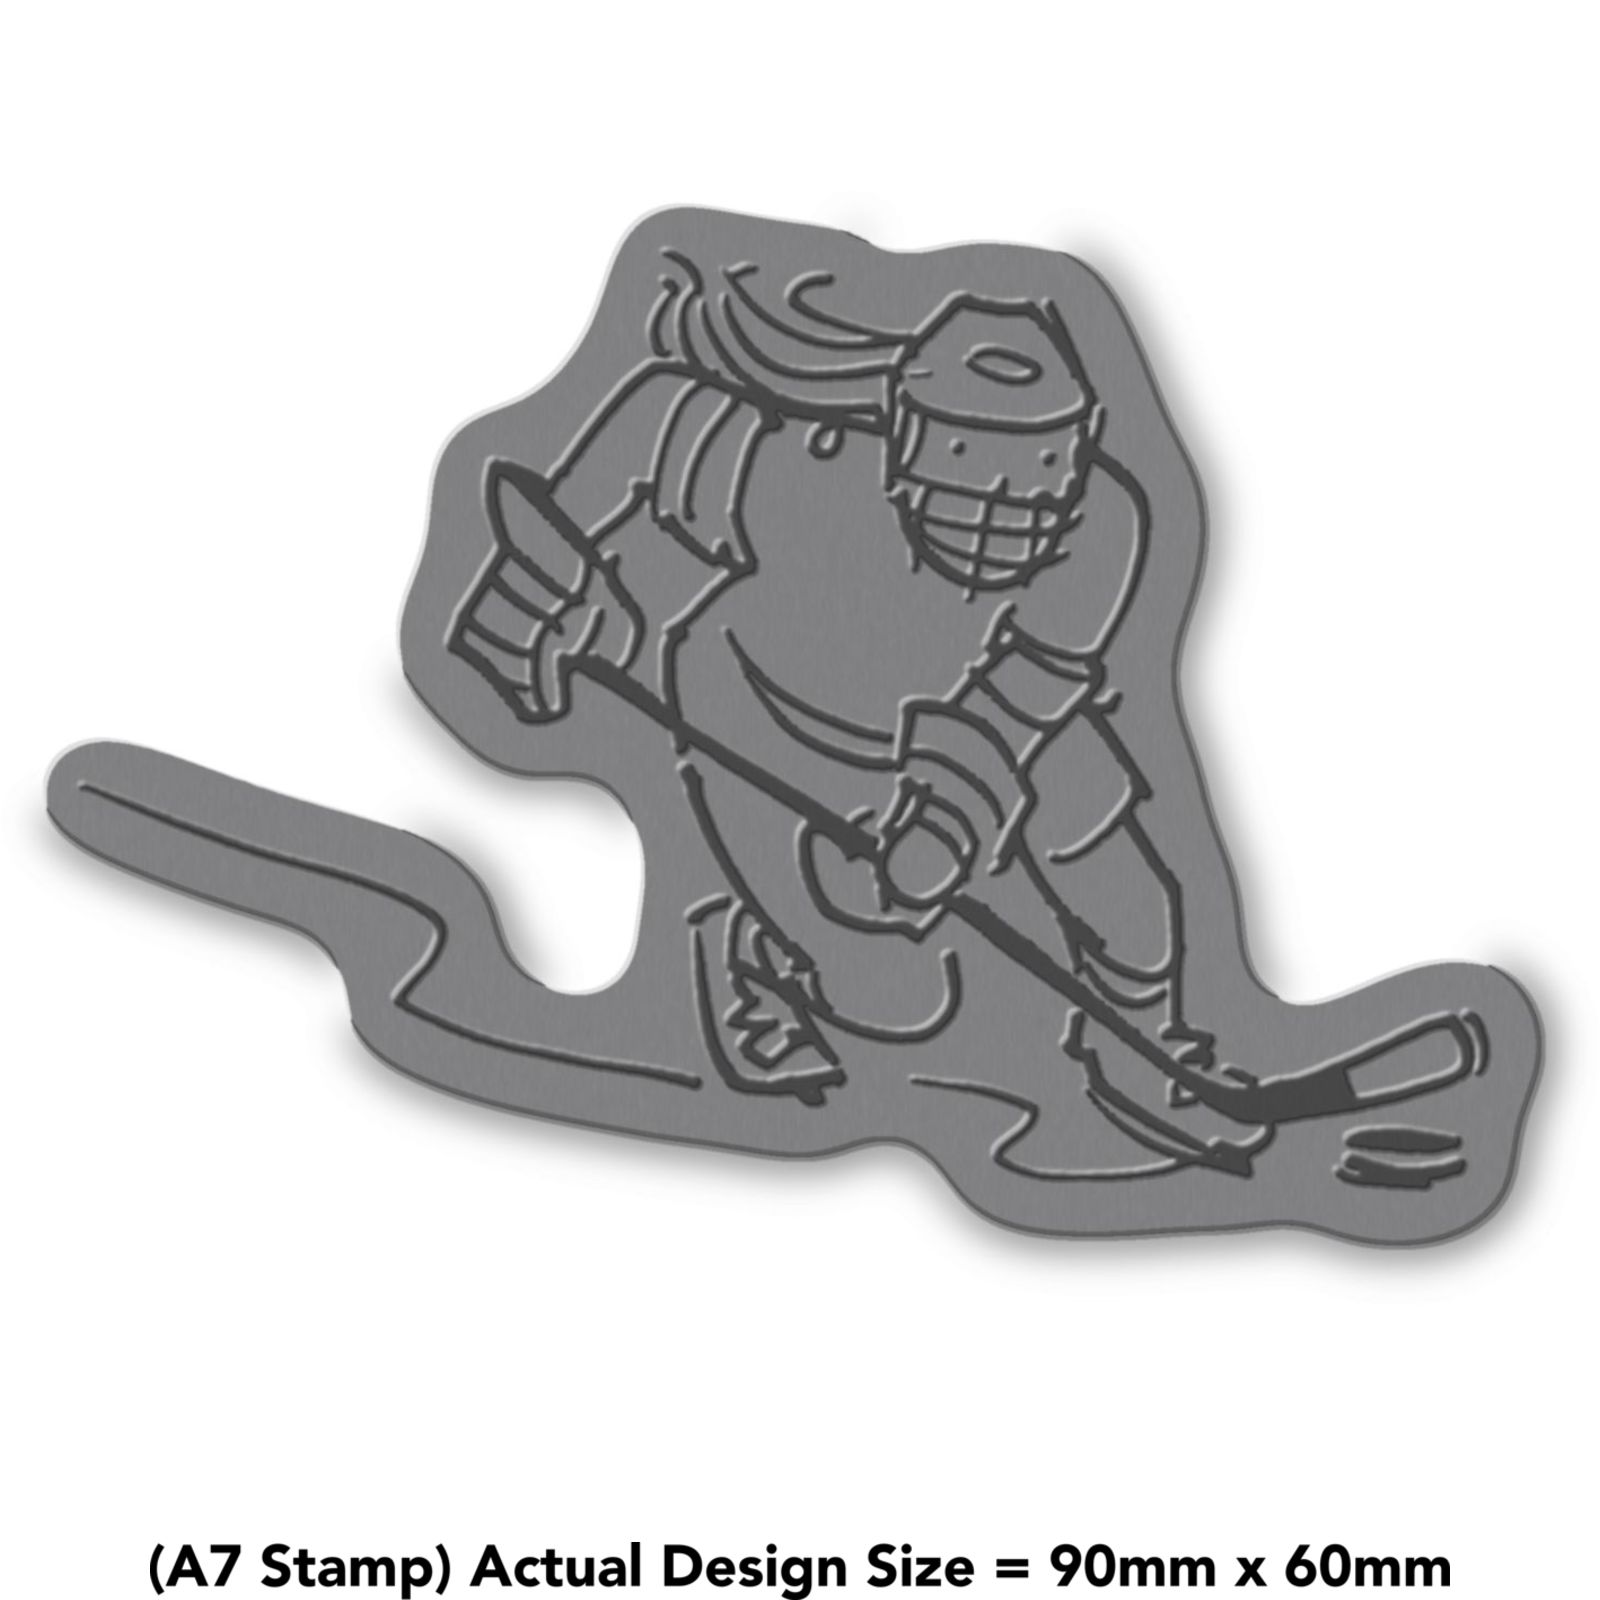 RS00042165 A8 'Ice Hockey Players' Unmounted Rubber Stamp 